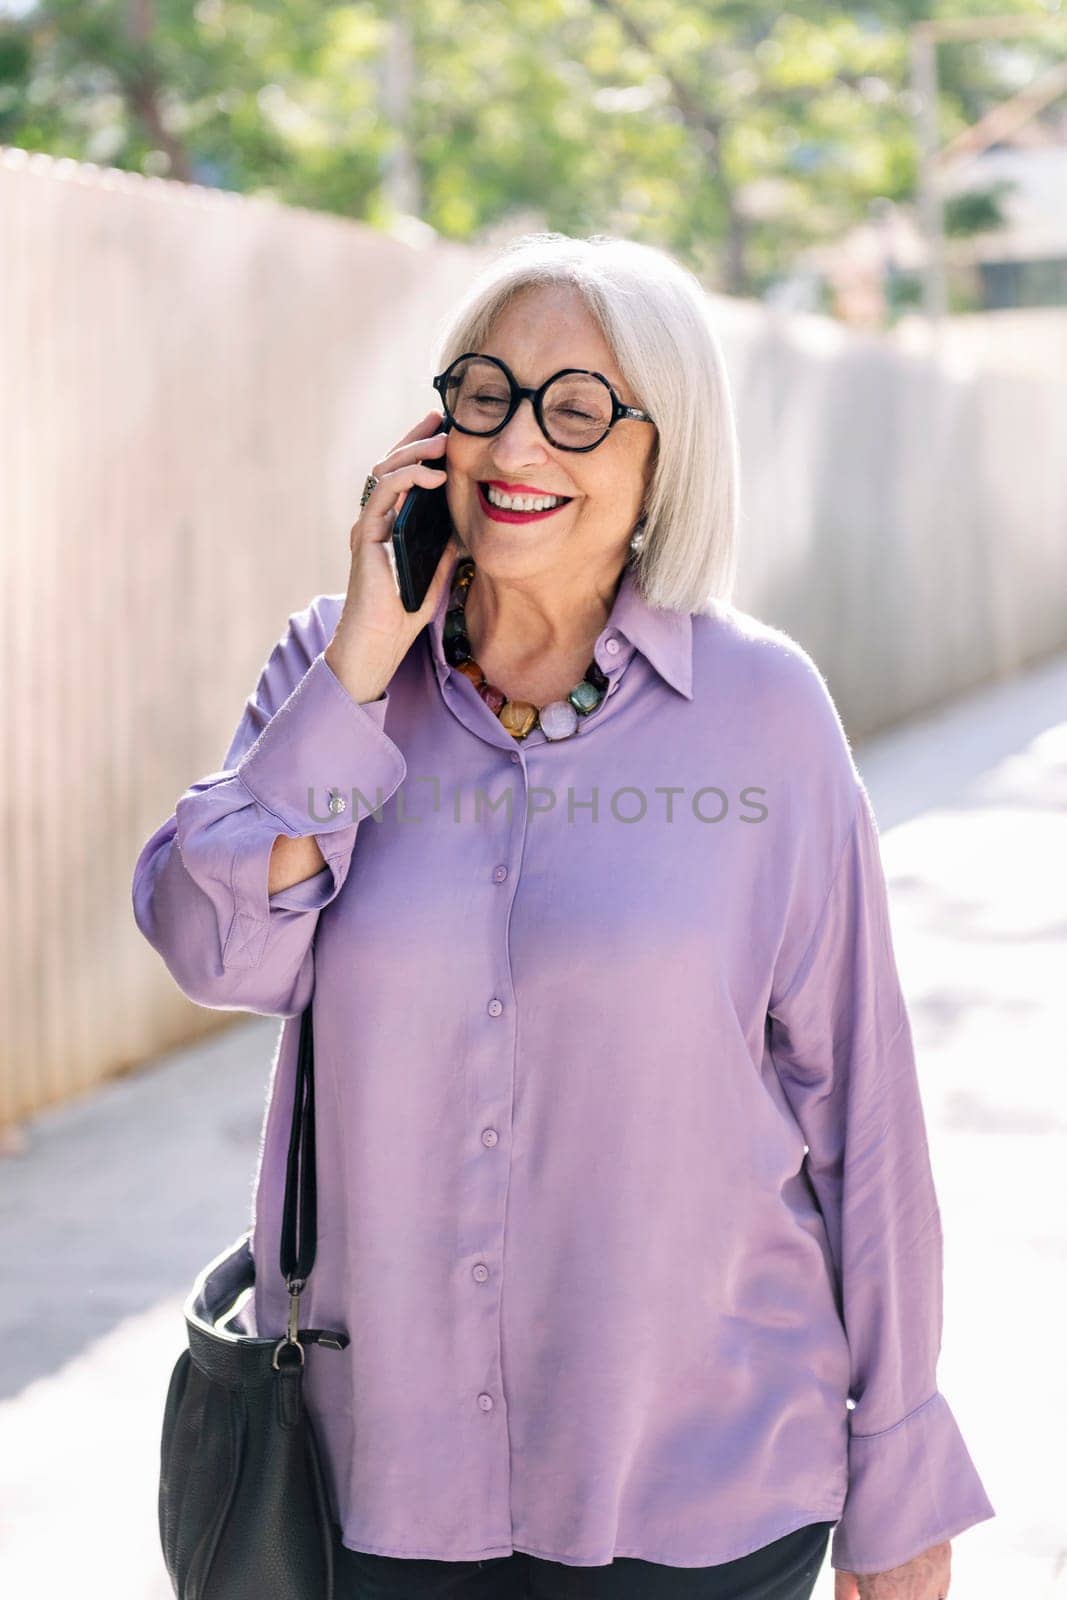 beautiful senior woman smiling happy while walking on the street talking on the phone, concept of technology and elderly people leisure